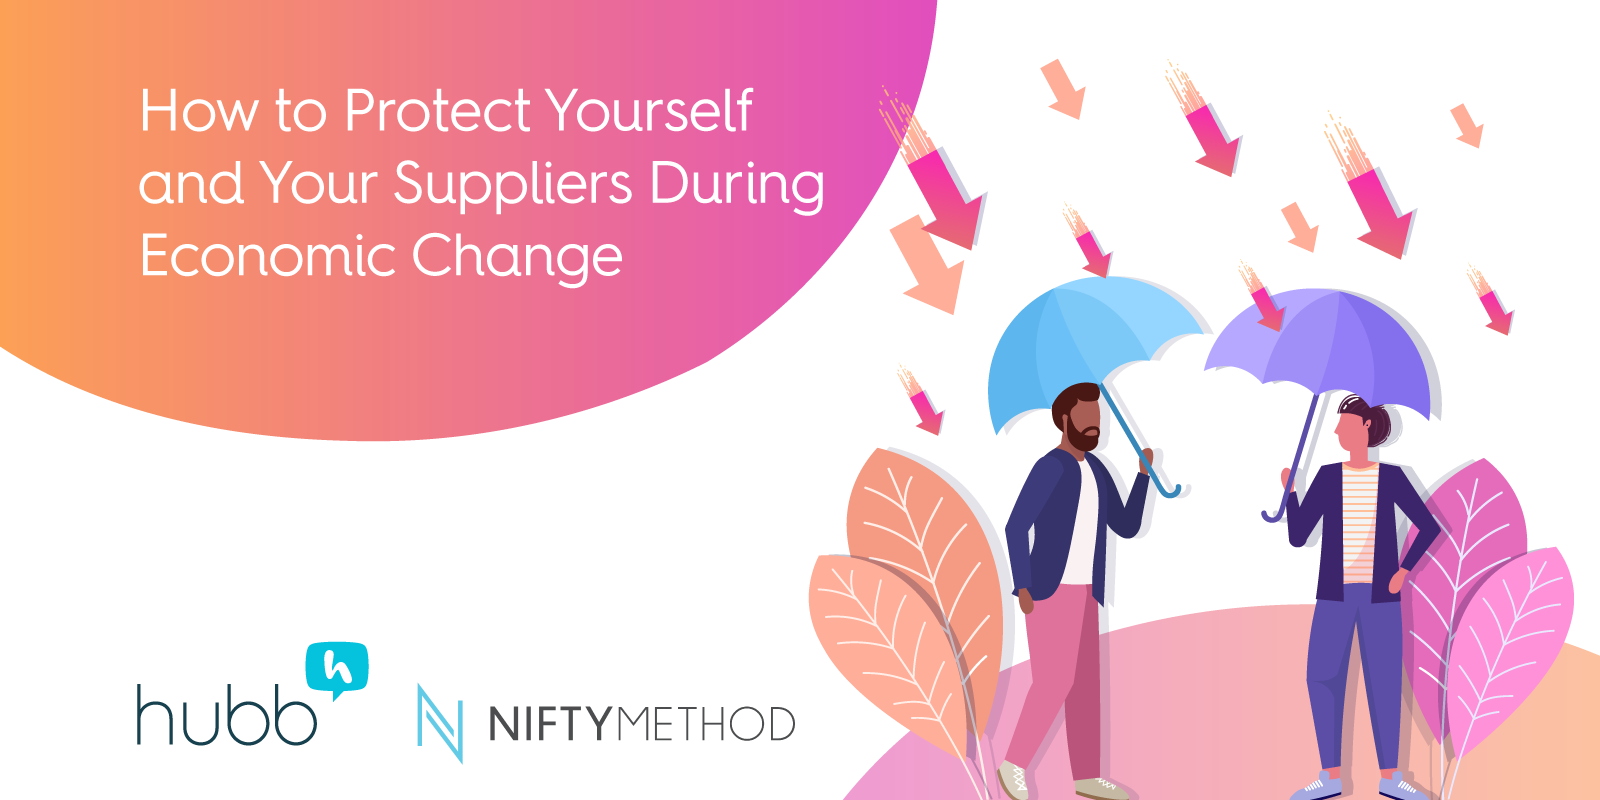 How to Protect Yourself and Your Suppliers During Economic Change